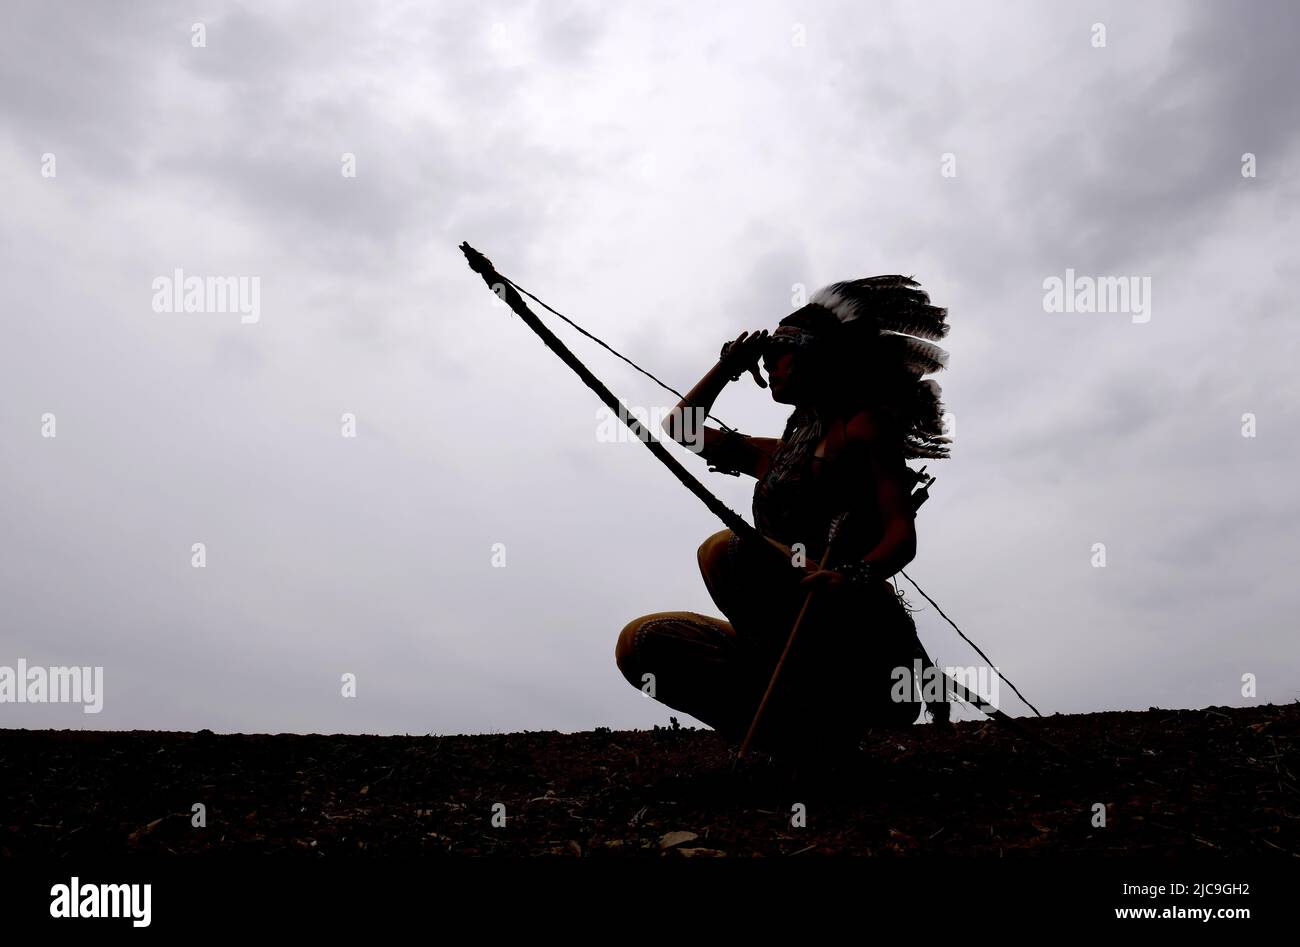 A young native American Indian girl is silhouetted in front of the evening sky. She stands proud with her weapons by her side. Stock Photo